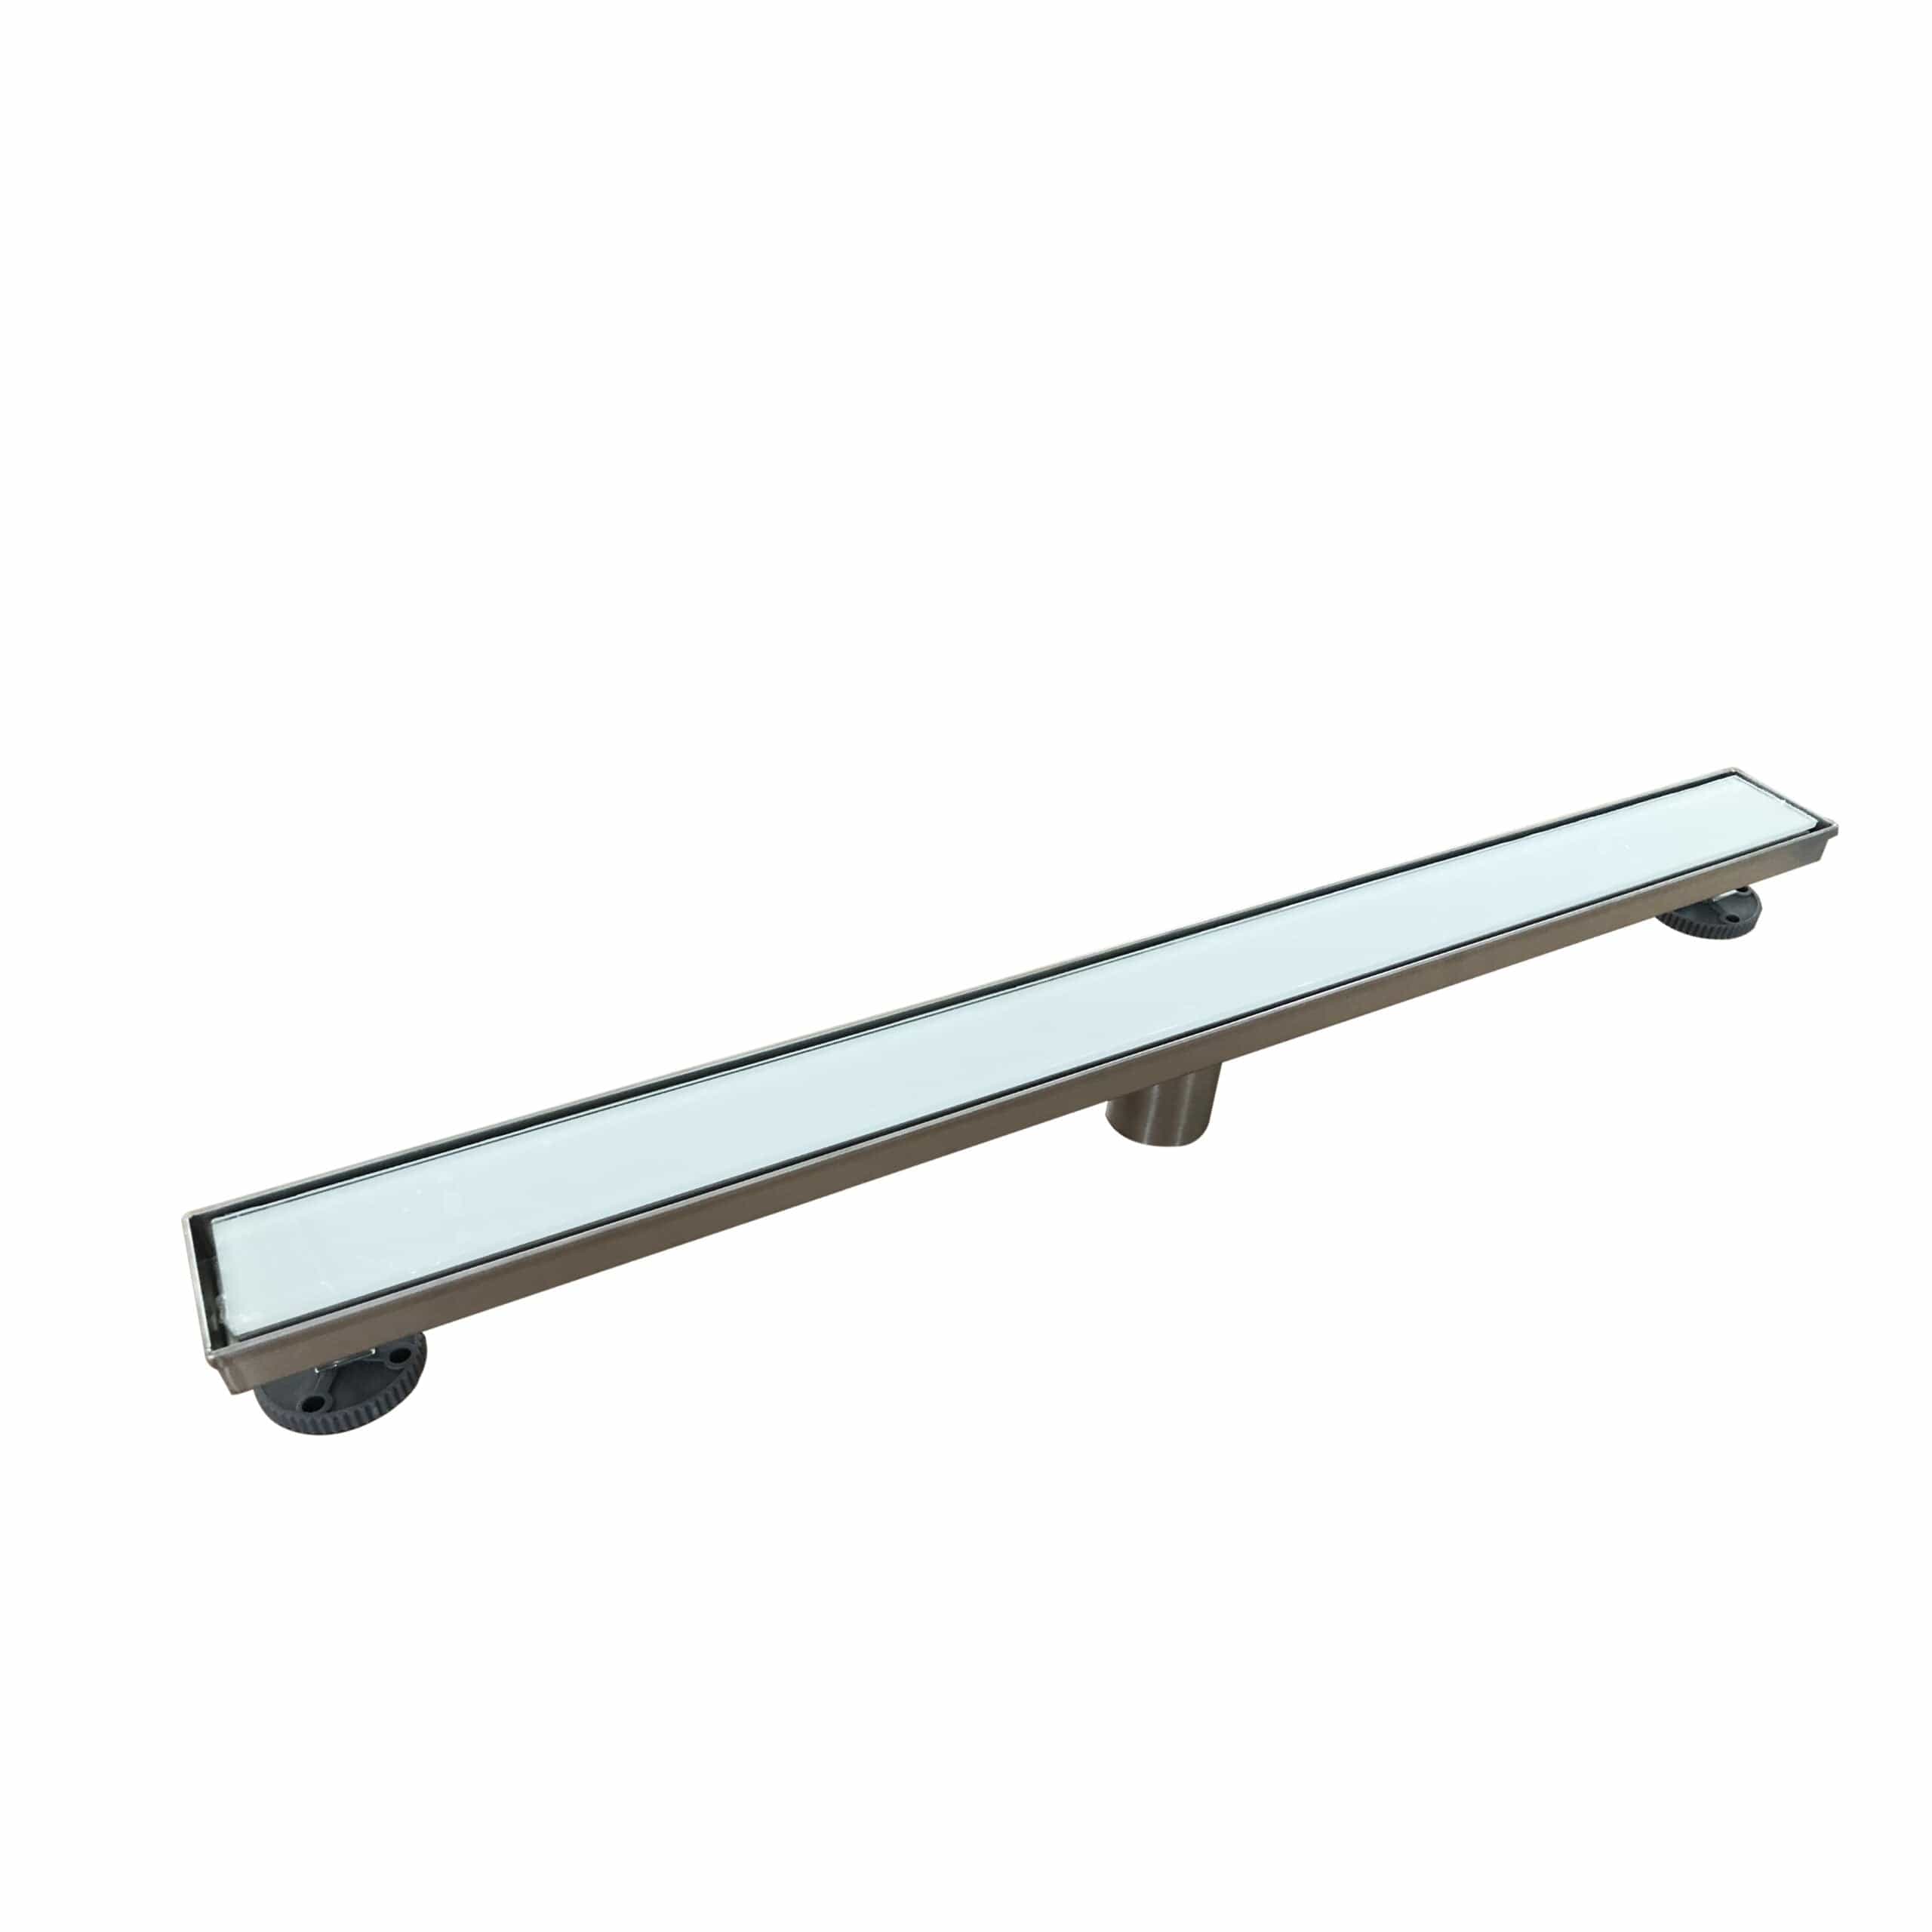 Tredex Linear Drain With Vertical Outlet (S-trap) 800X70X67mm | Supply Master | Accra, Ghana Bathroom Accessories Buy Tools hardware Building materials